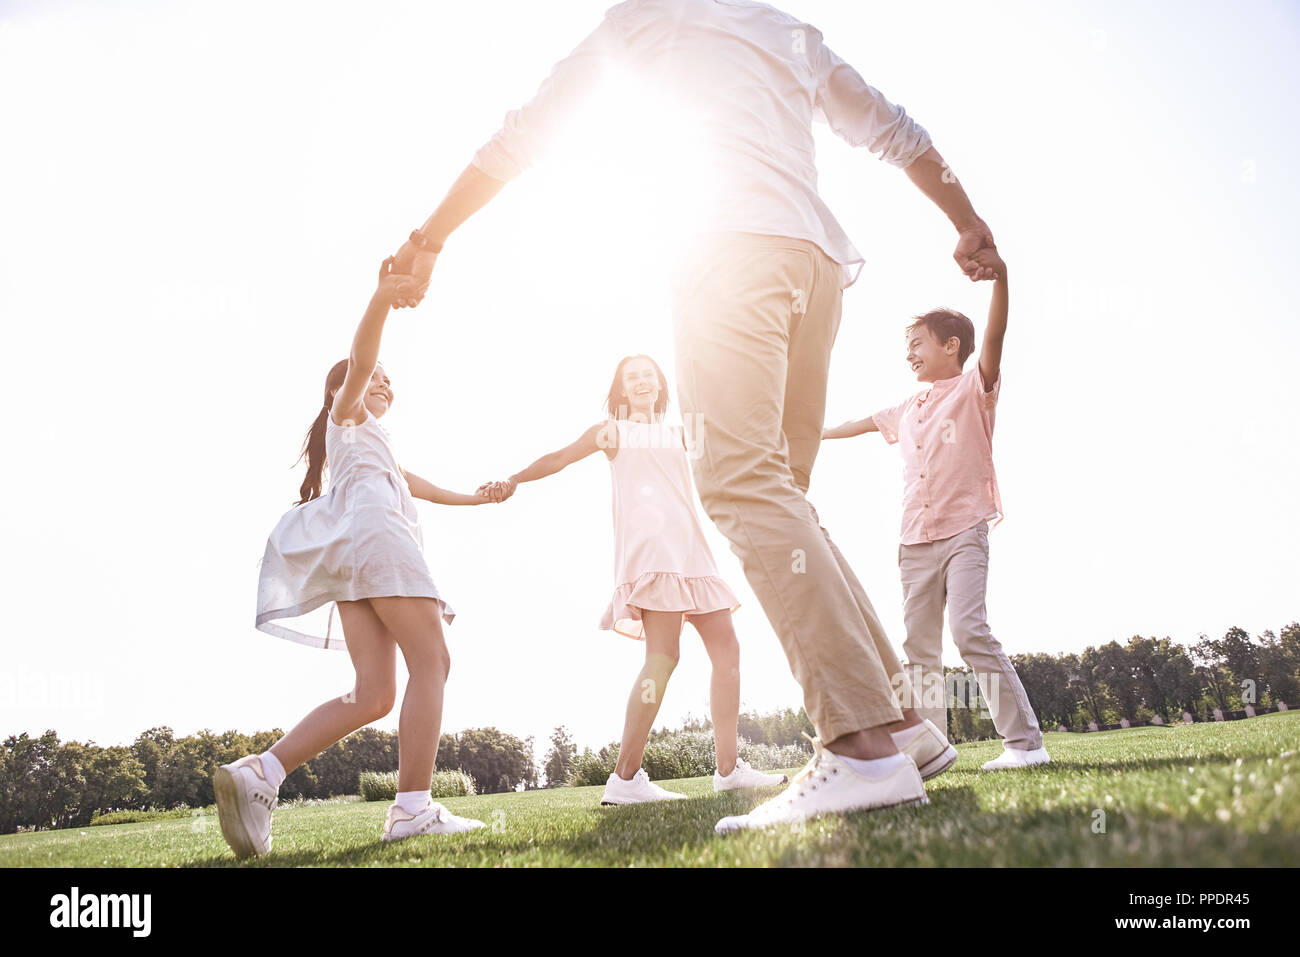 Bonding. Family of four holding hands dancing in circle on a gra Stock Photo